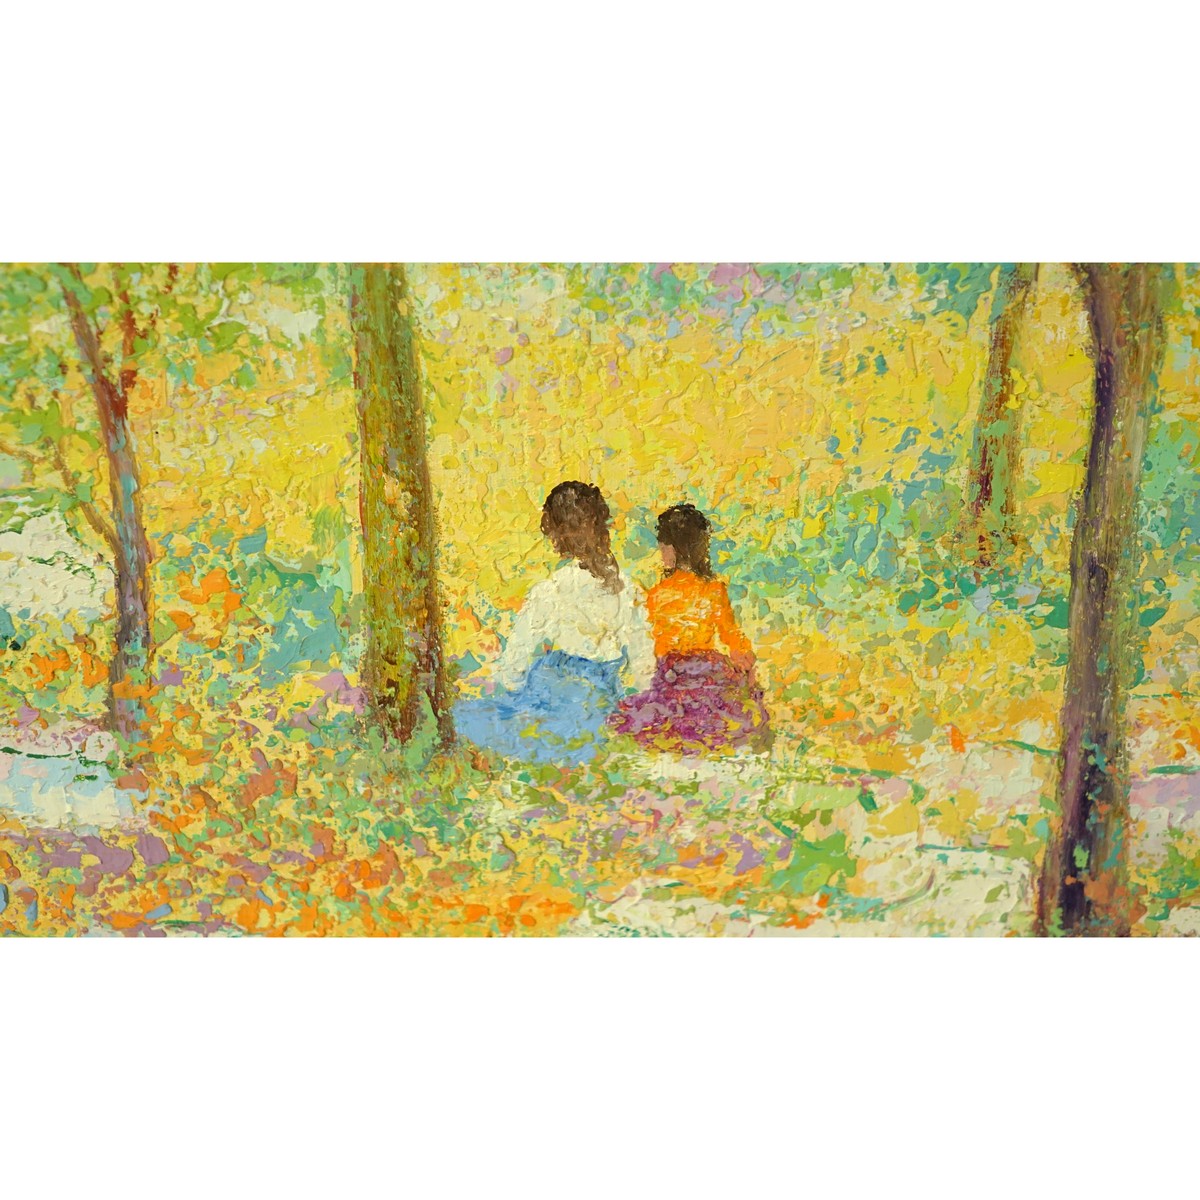 Mid Century Oil On Canvas "Figures In The Woods" Signed lower right H. Suarez??, gallery label en verso: Galerie Felix Vercel, NY.